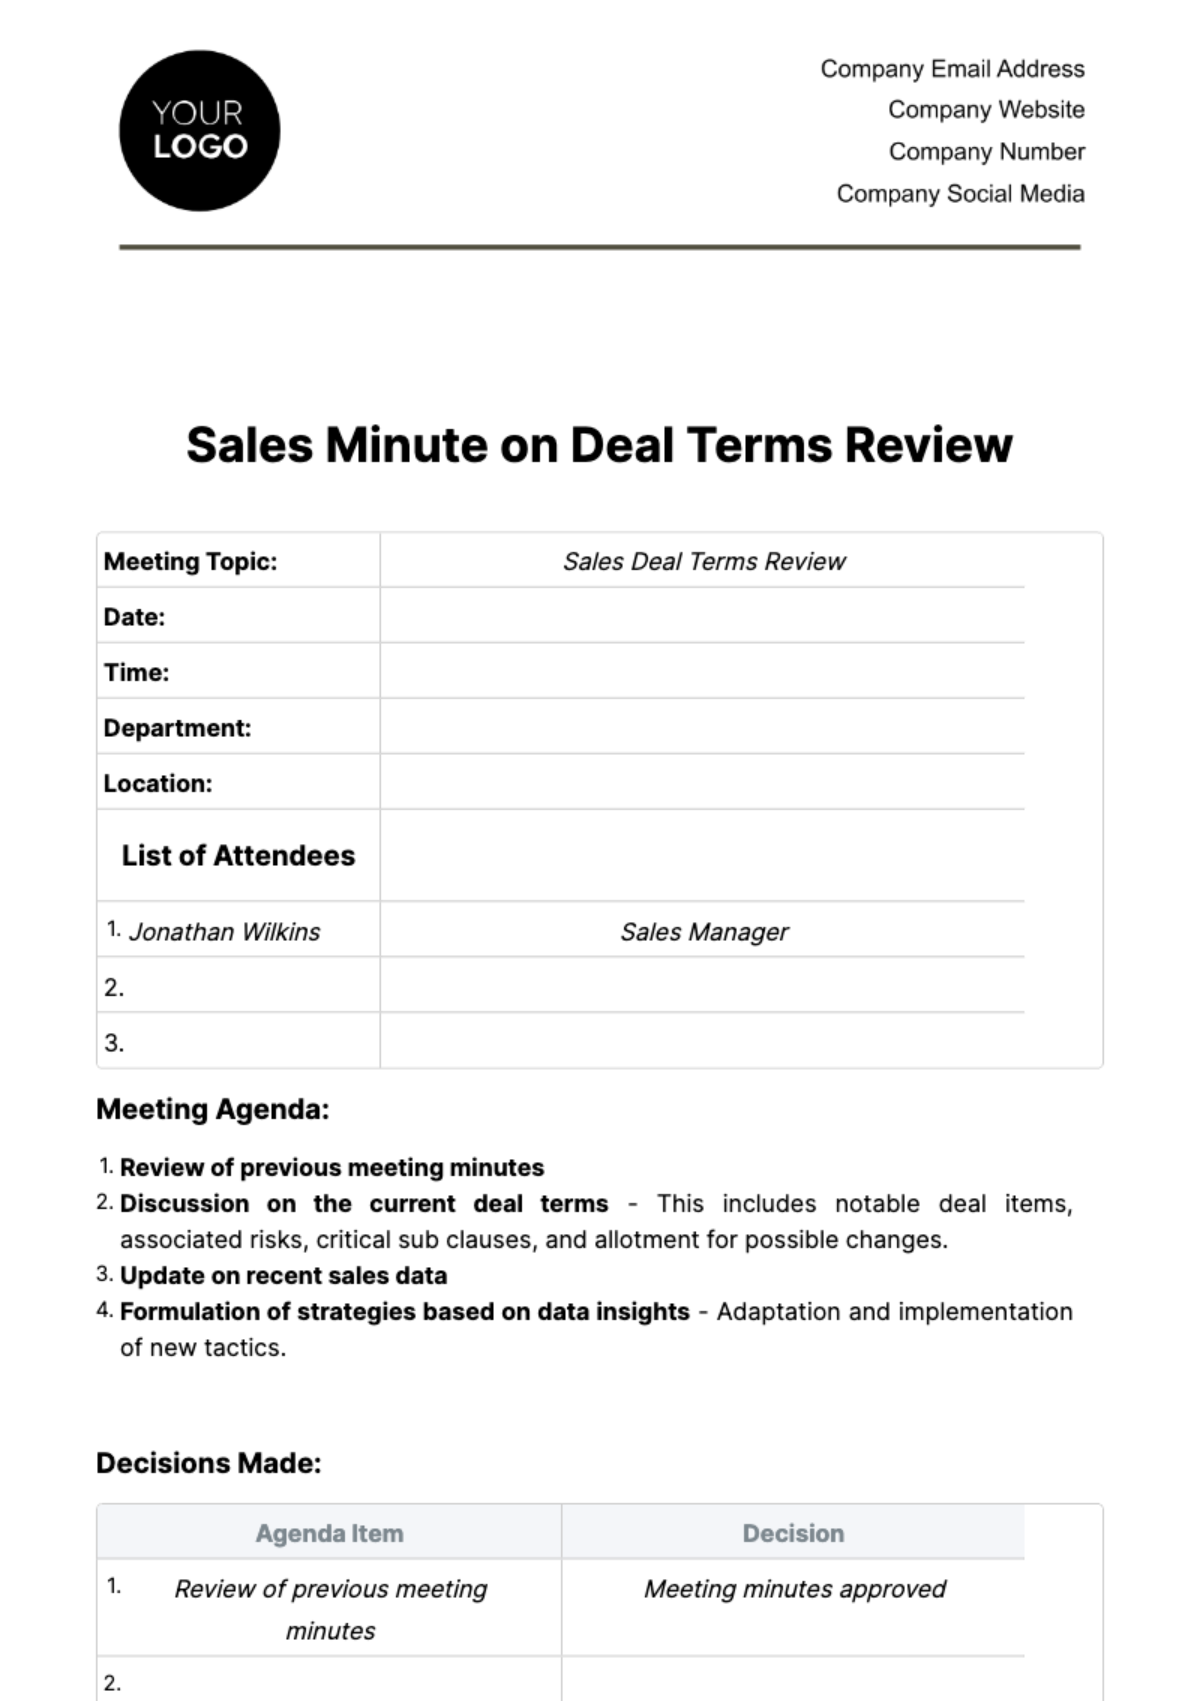 Free Sales Minute on Deal Terms Review Template